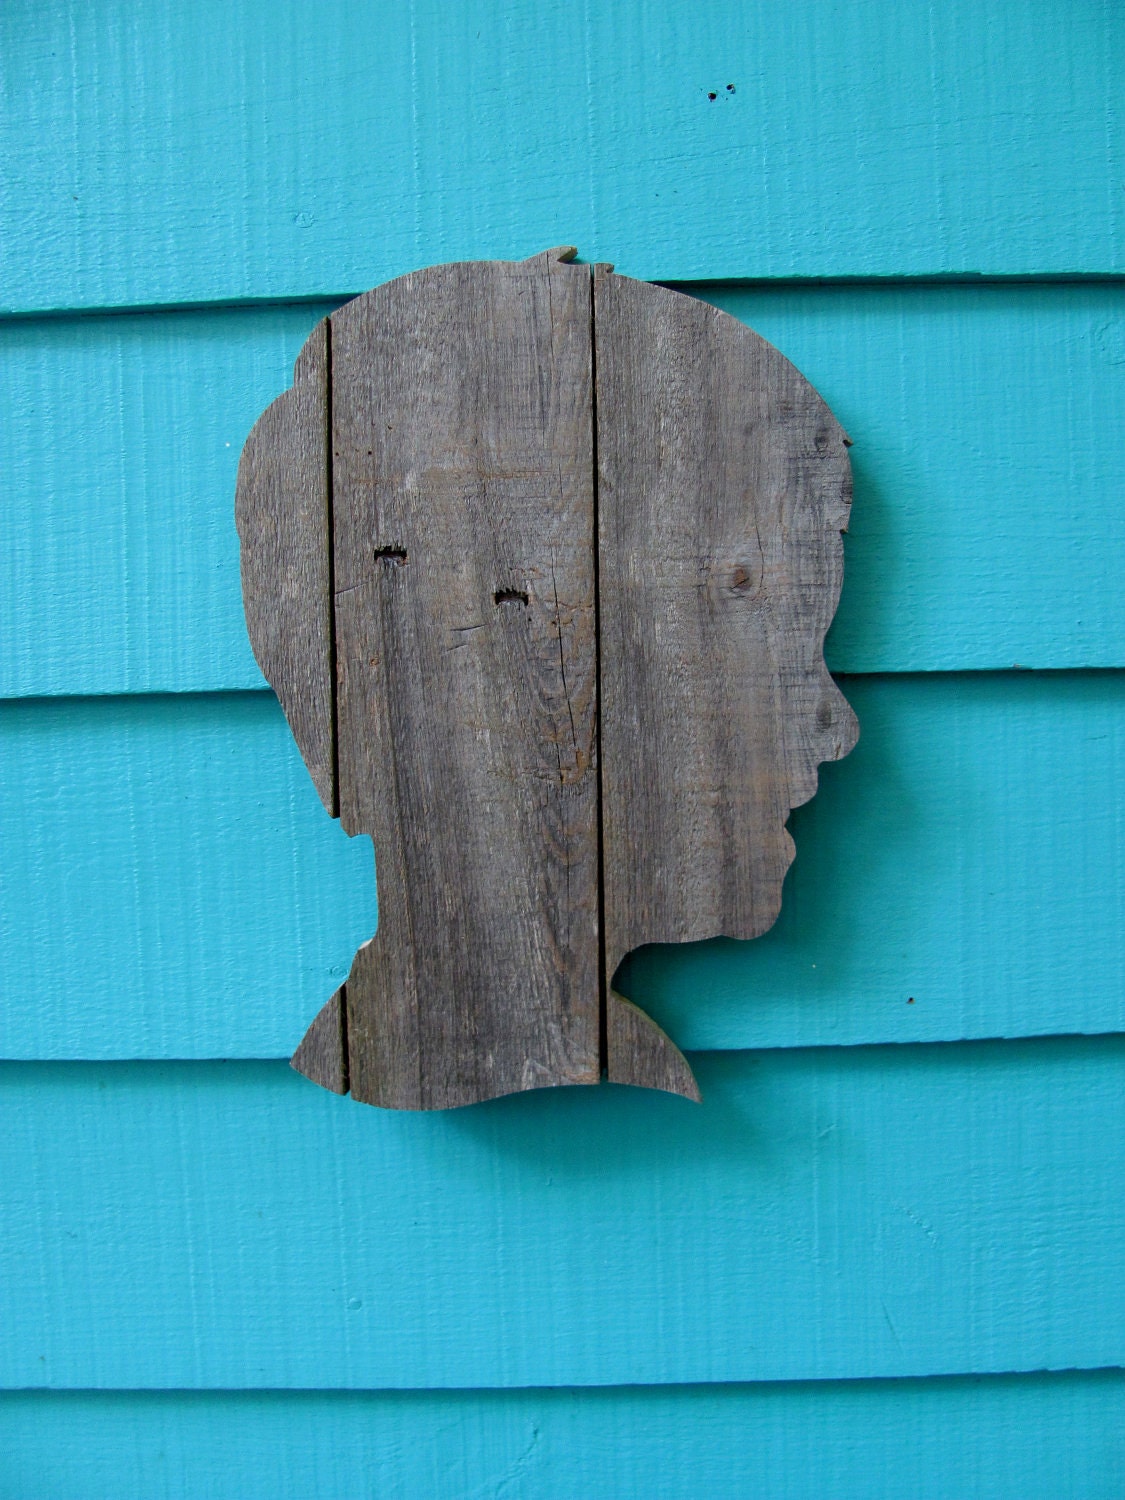 Custom Silhouette Portrait made of recycled wood